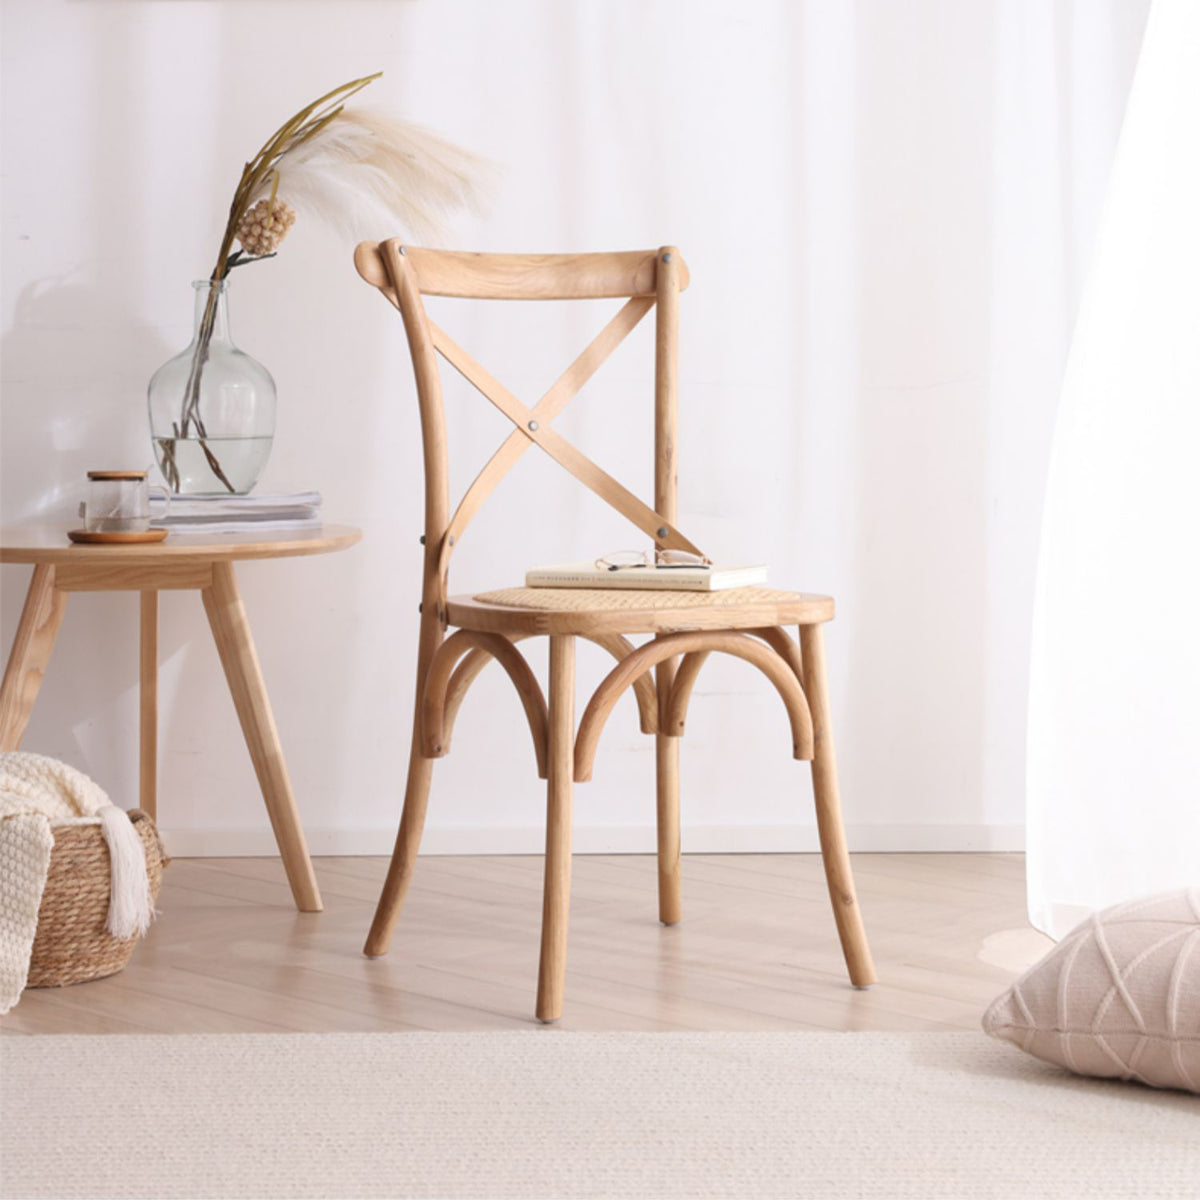 Stylish Beech Wood and Rattan Chair - Natural Elegance for Your Home fcf-1483